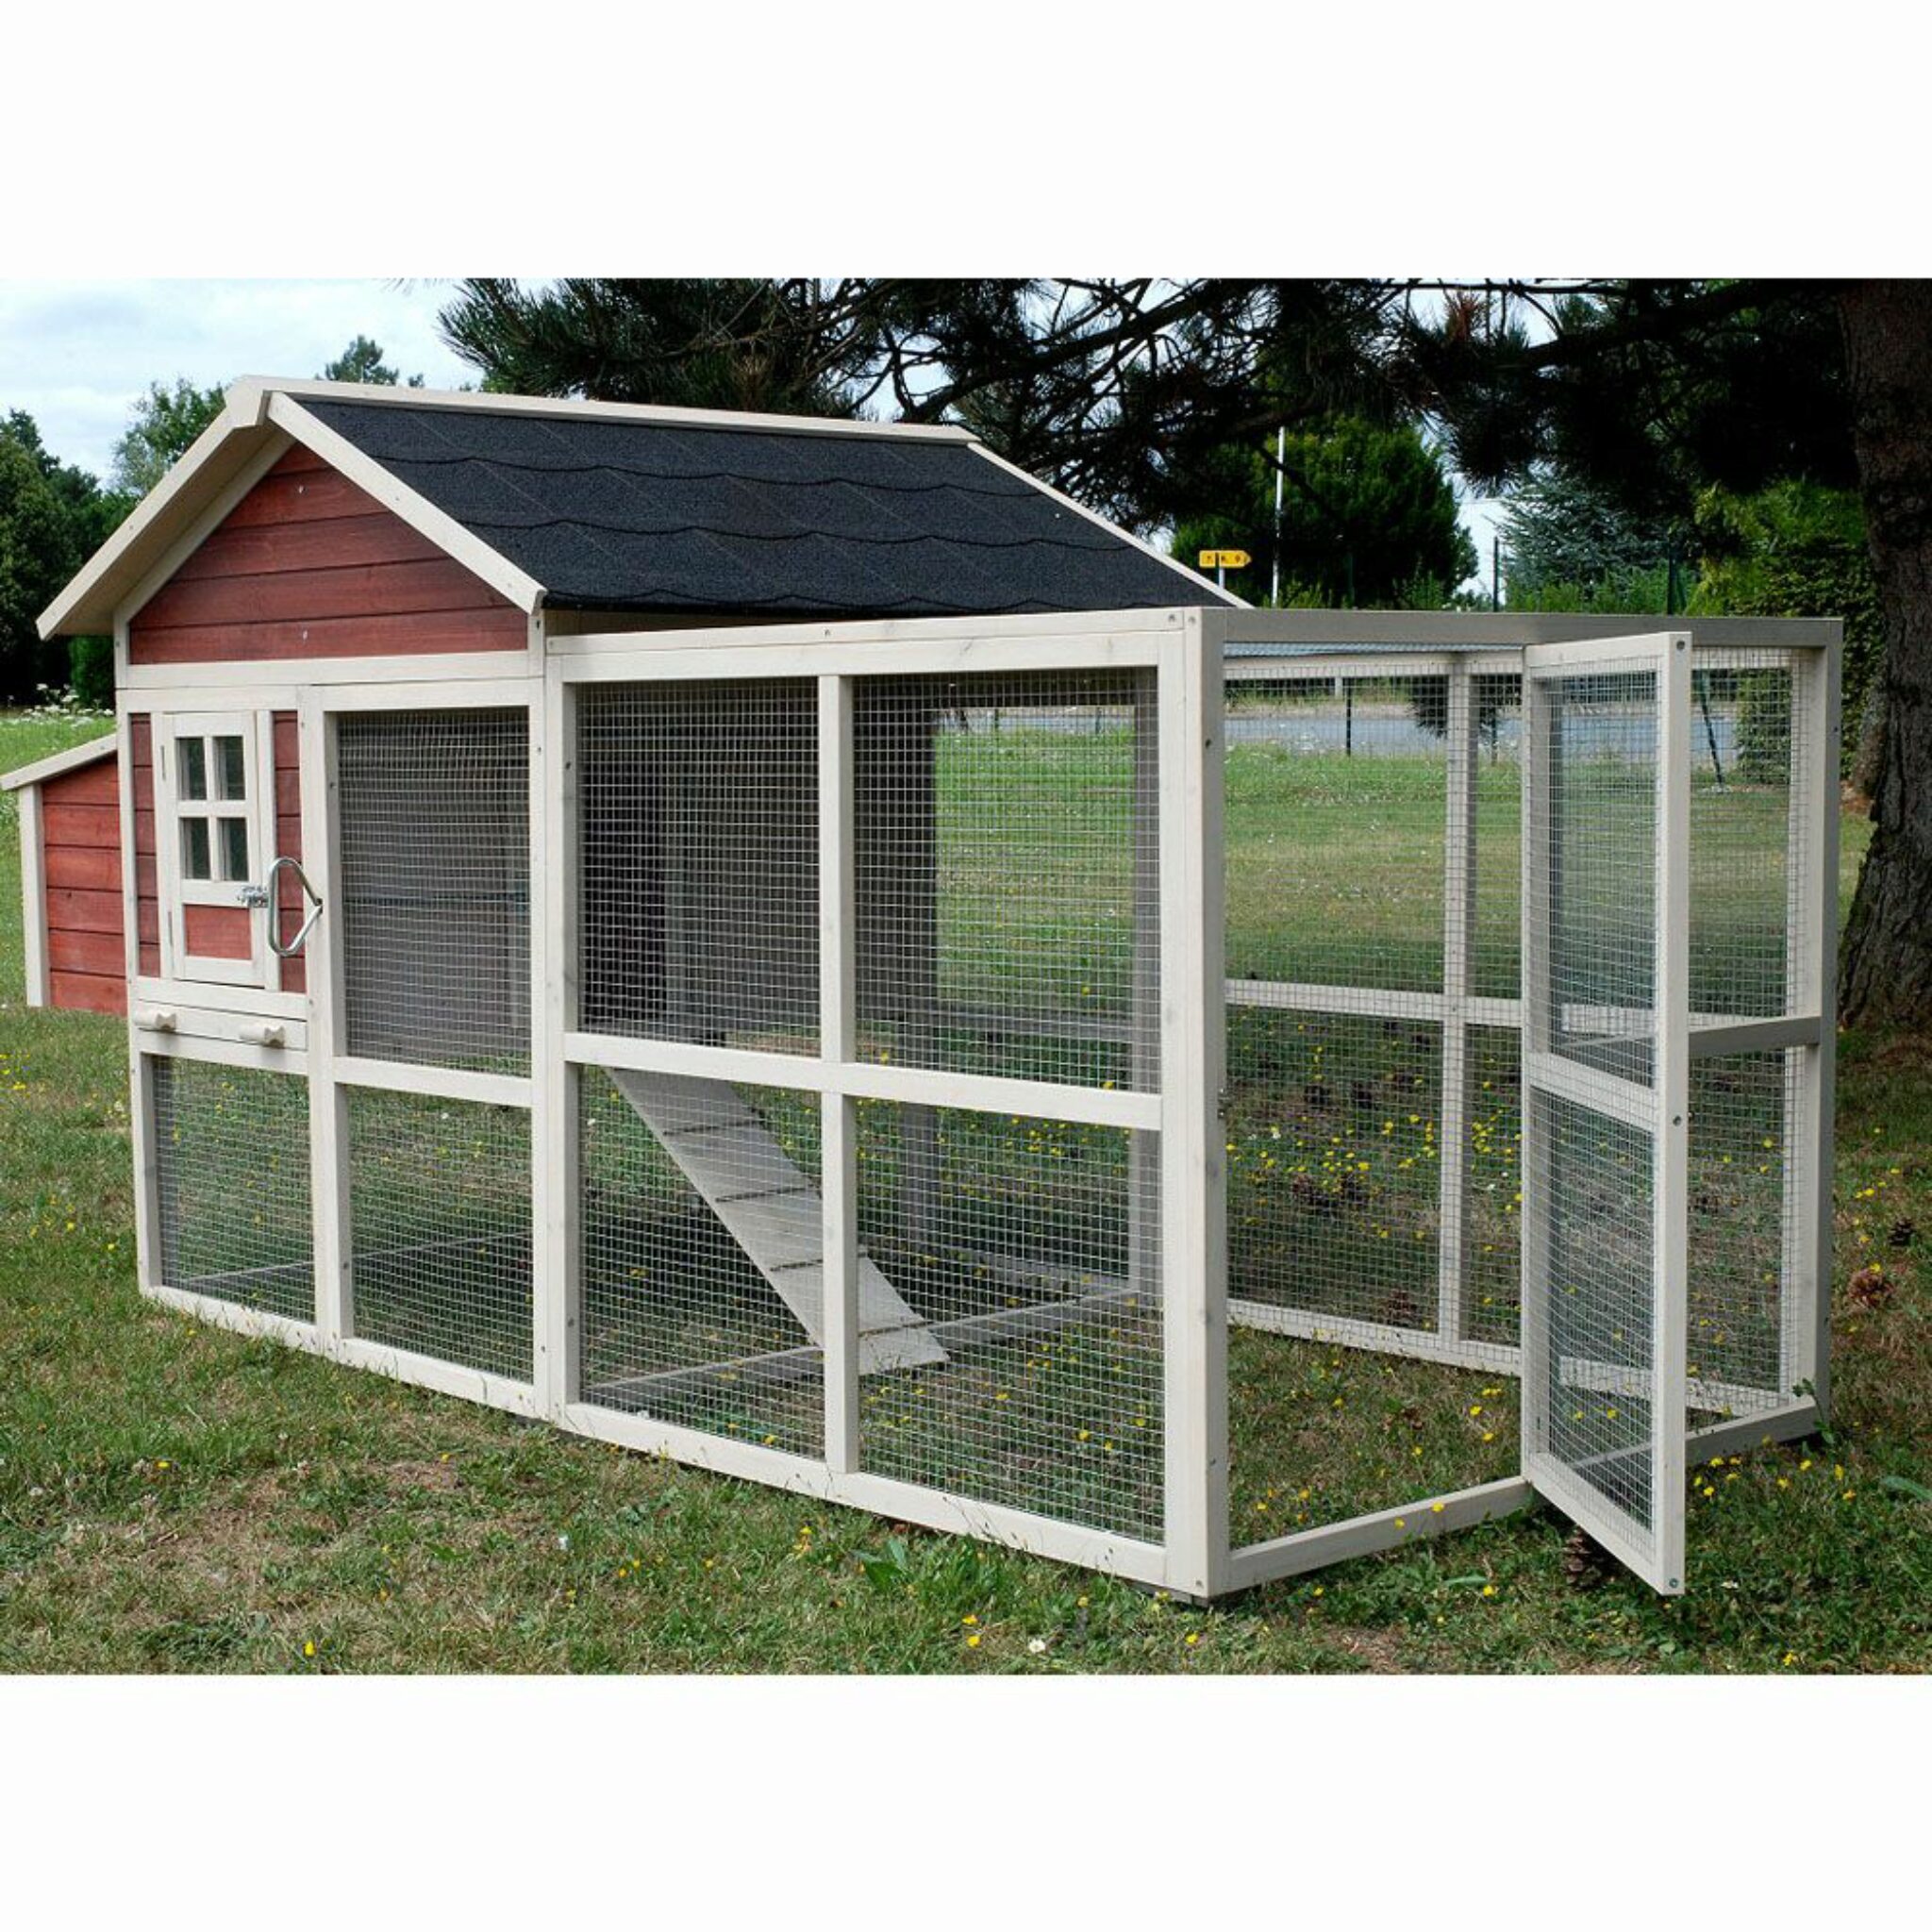 hutchandcage Best Chicken Coop Review Top 5 Des Poulaillers 2021